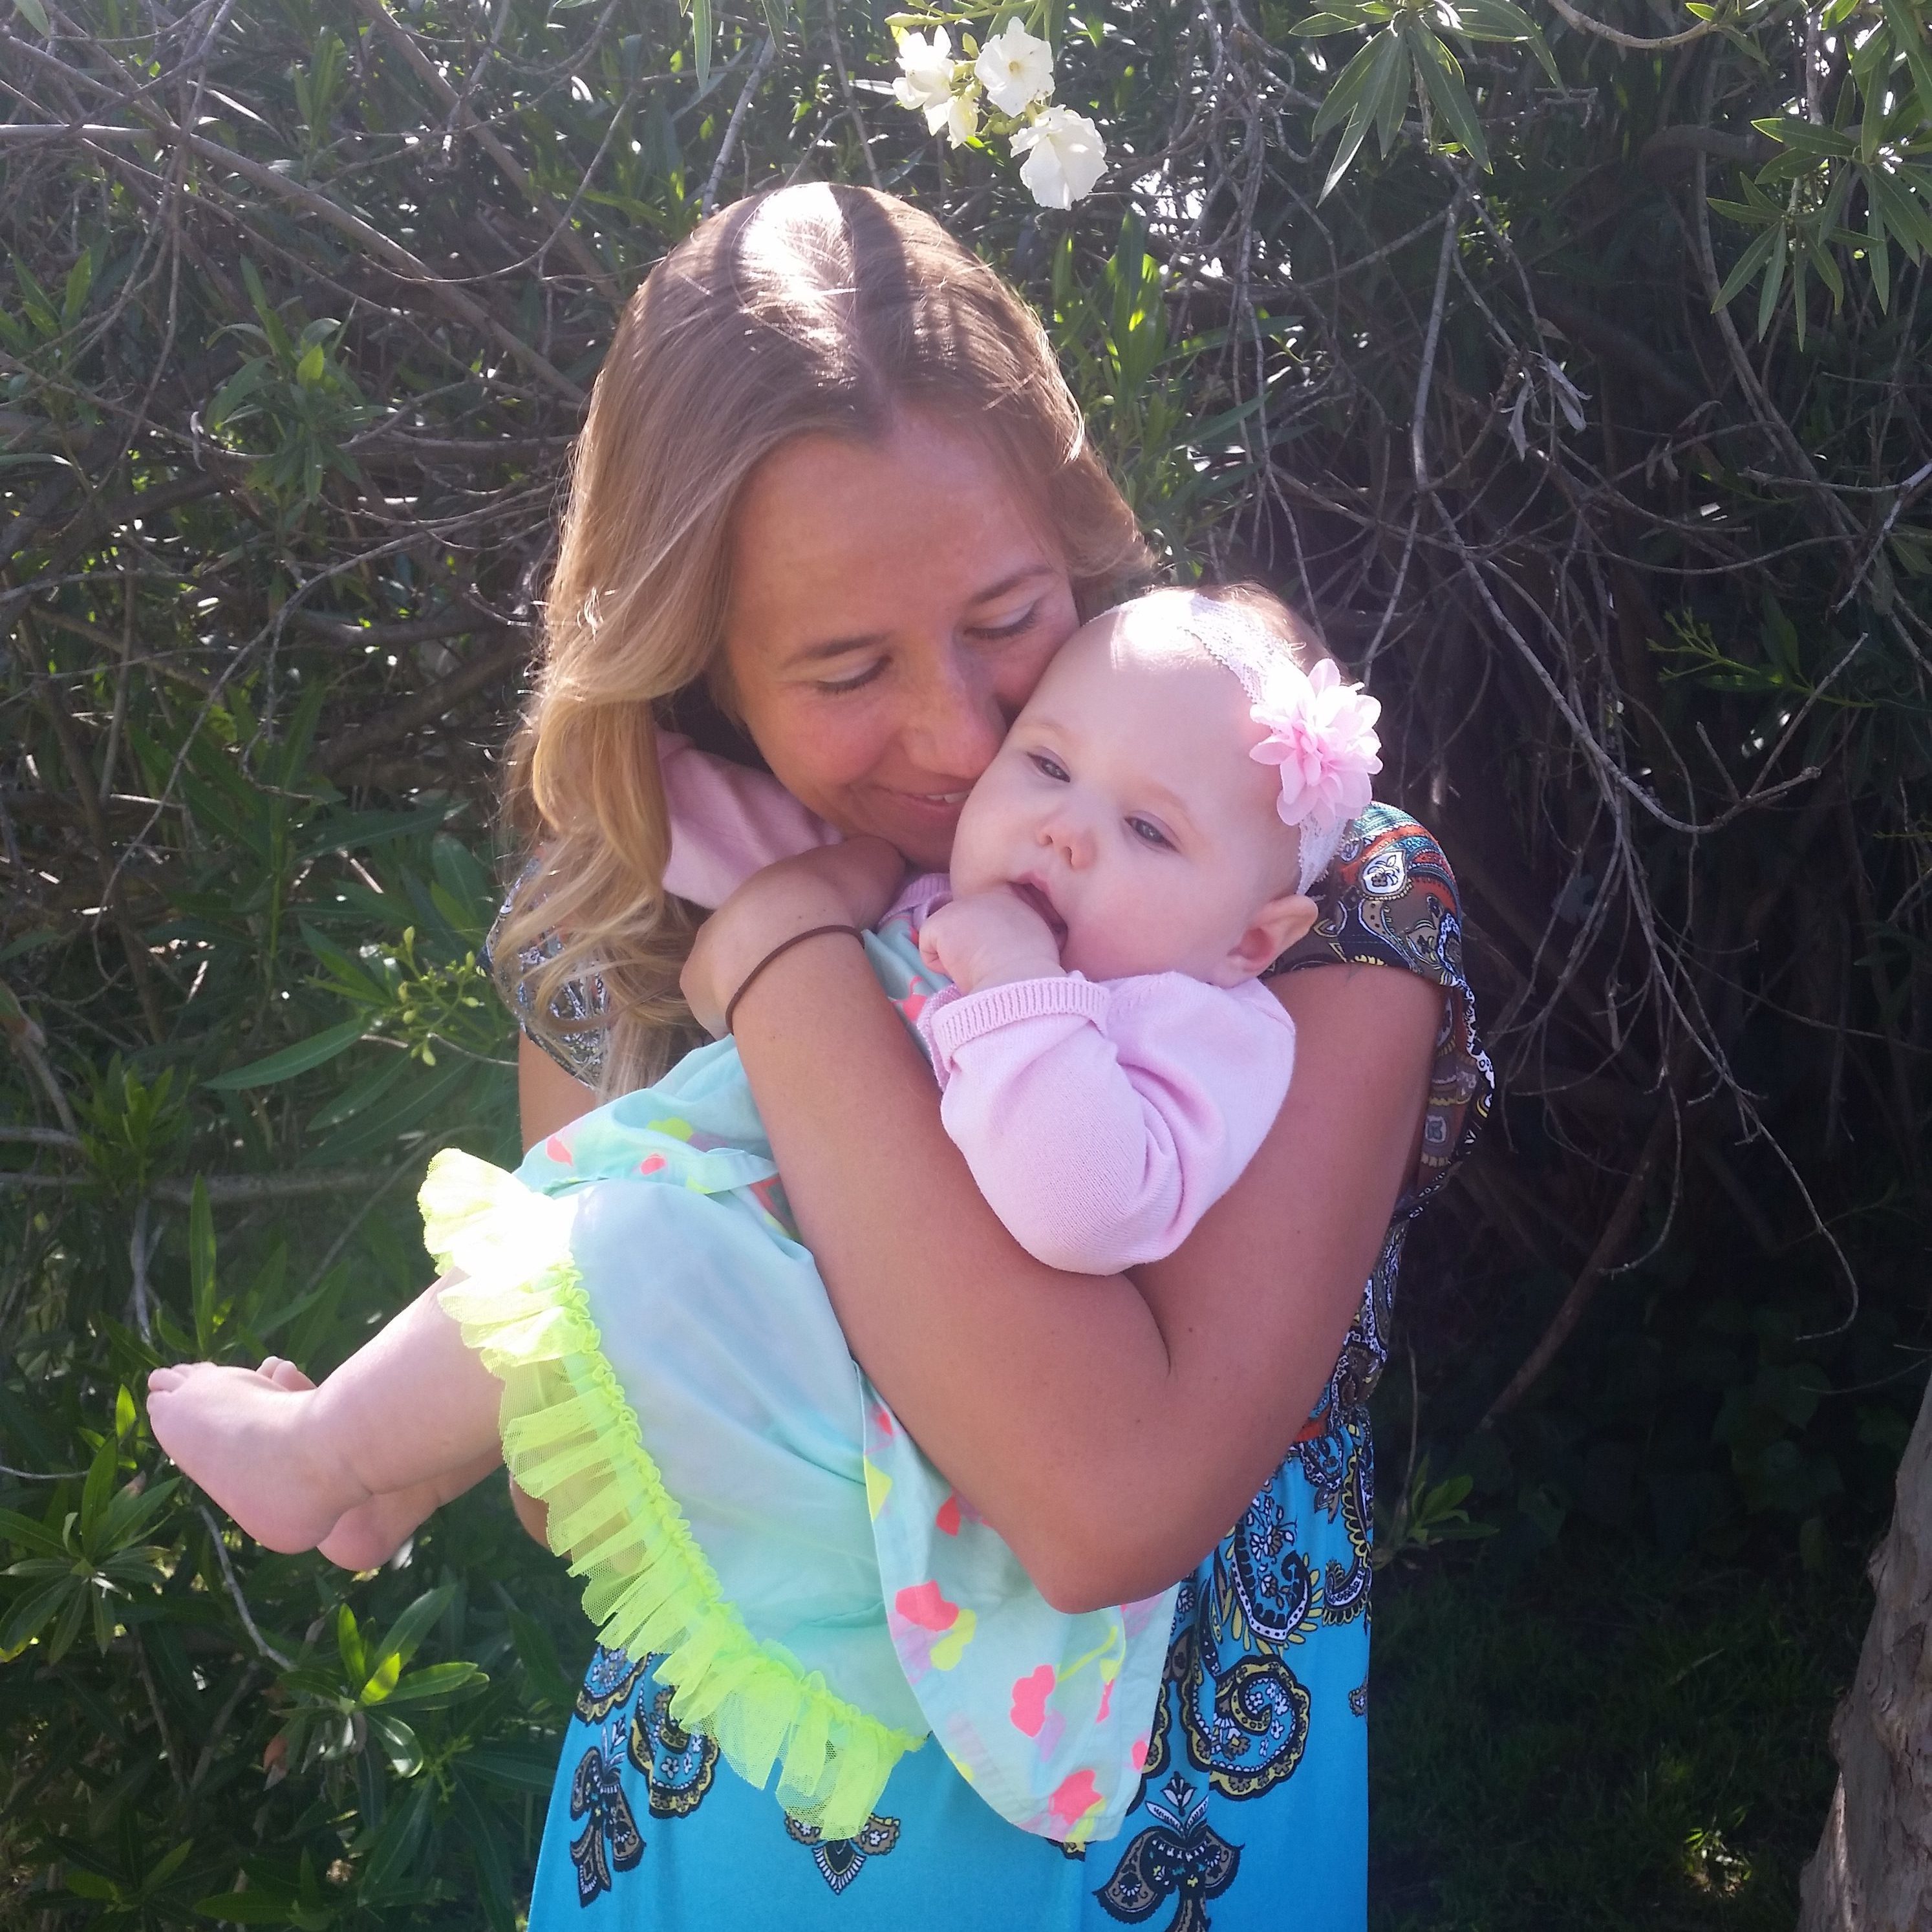 A mother wearing a blue dress holding her baby daughter who wears a pink sweater and teal dress.